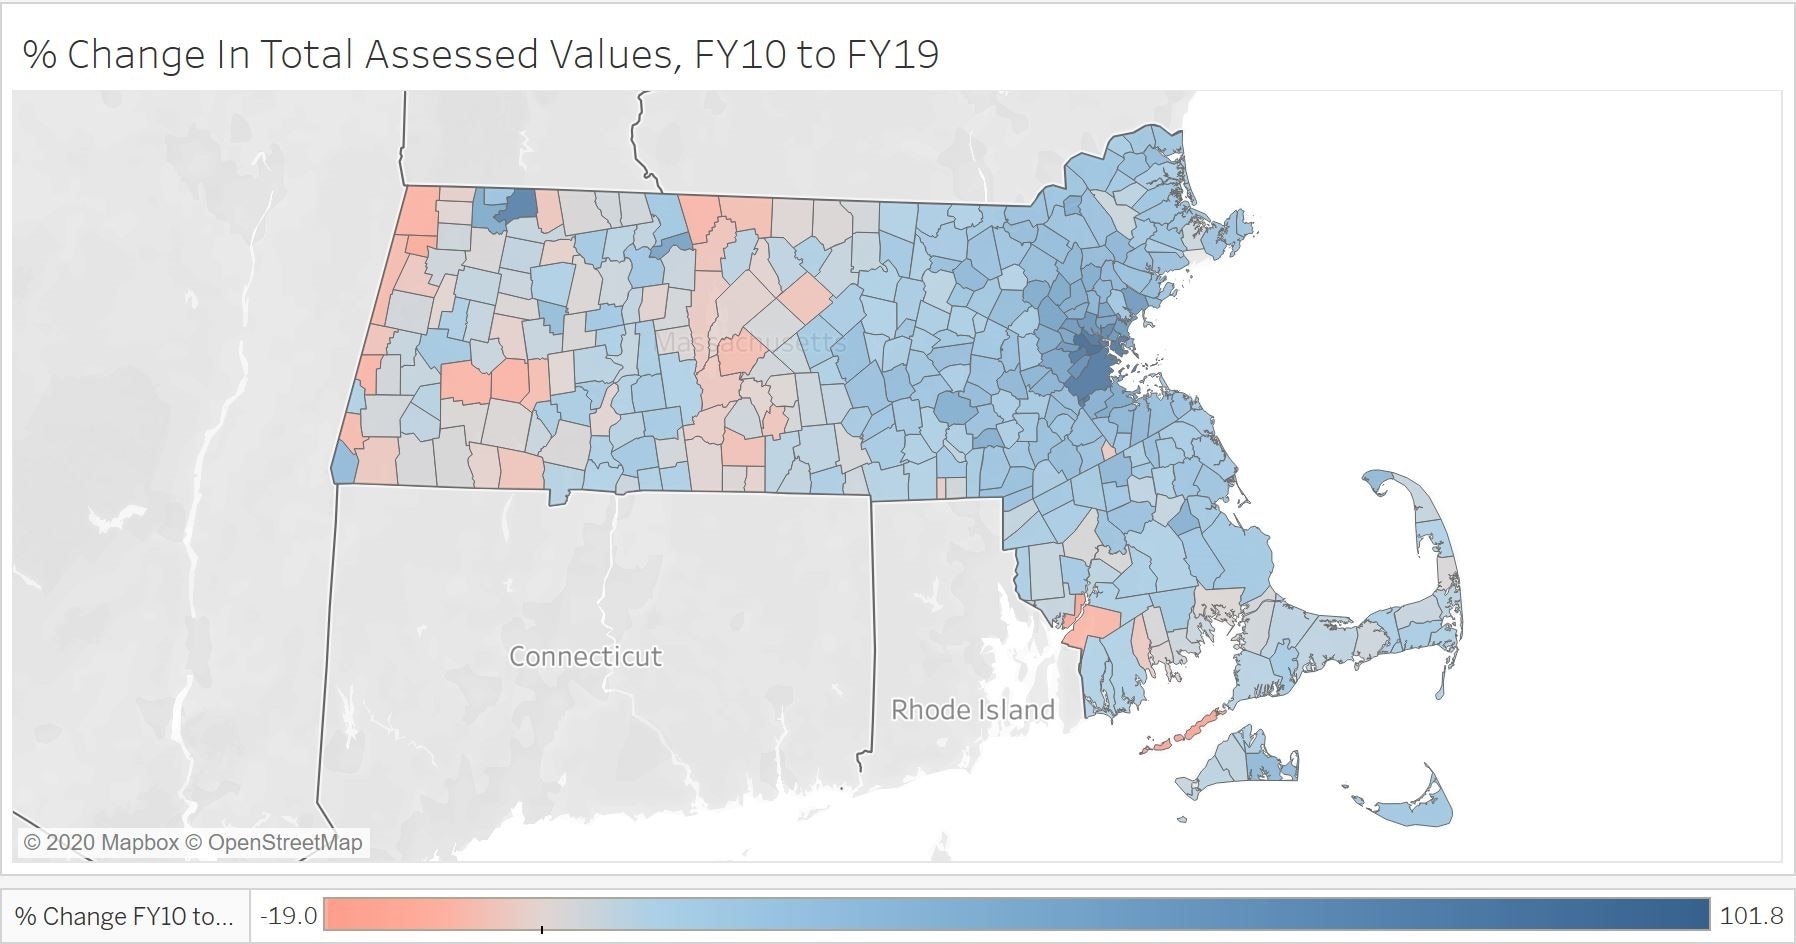 Figure 1—Percent Change in Total Assessed Values FY 2010 to FY 2019